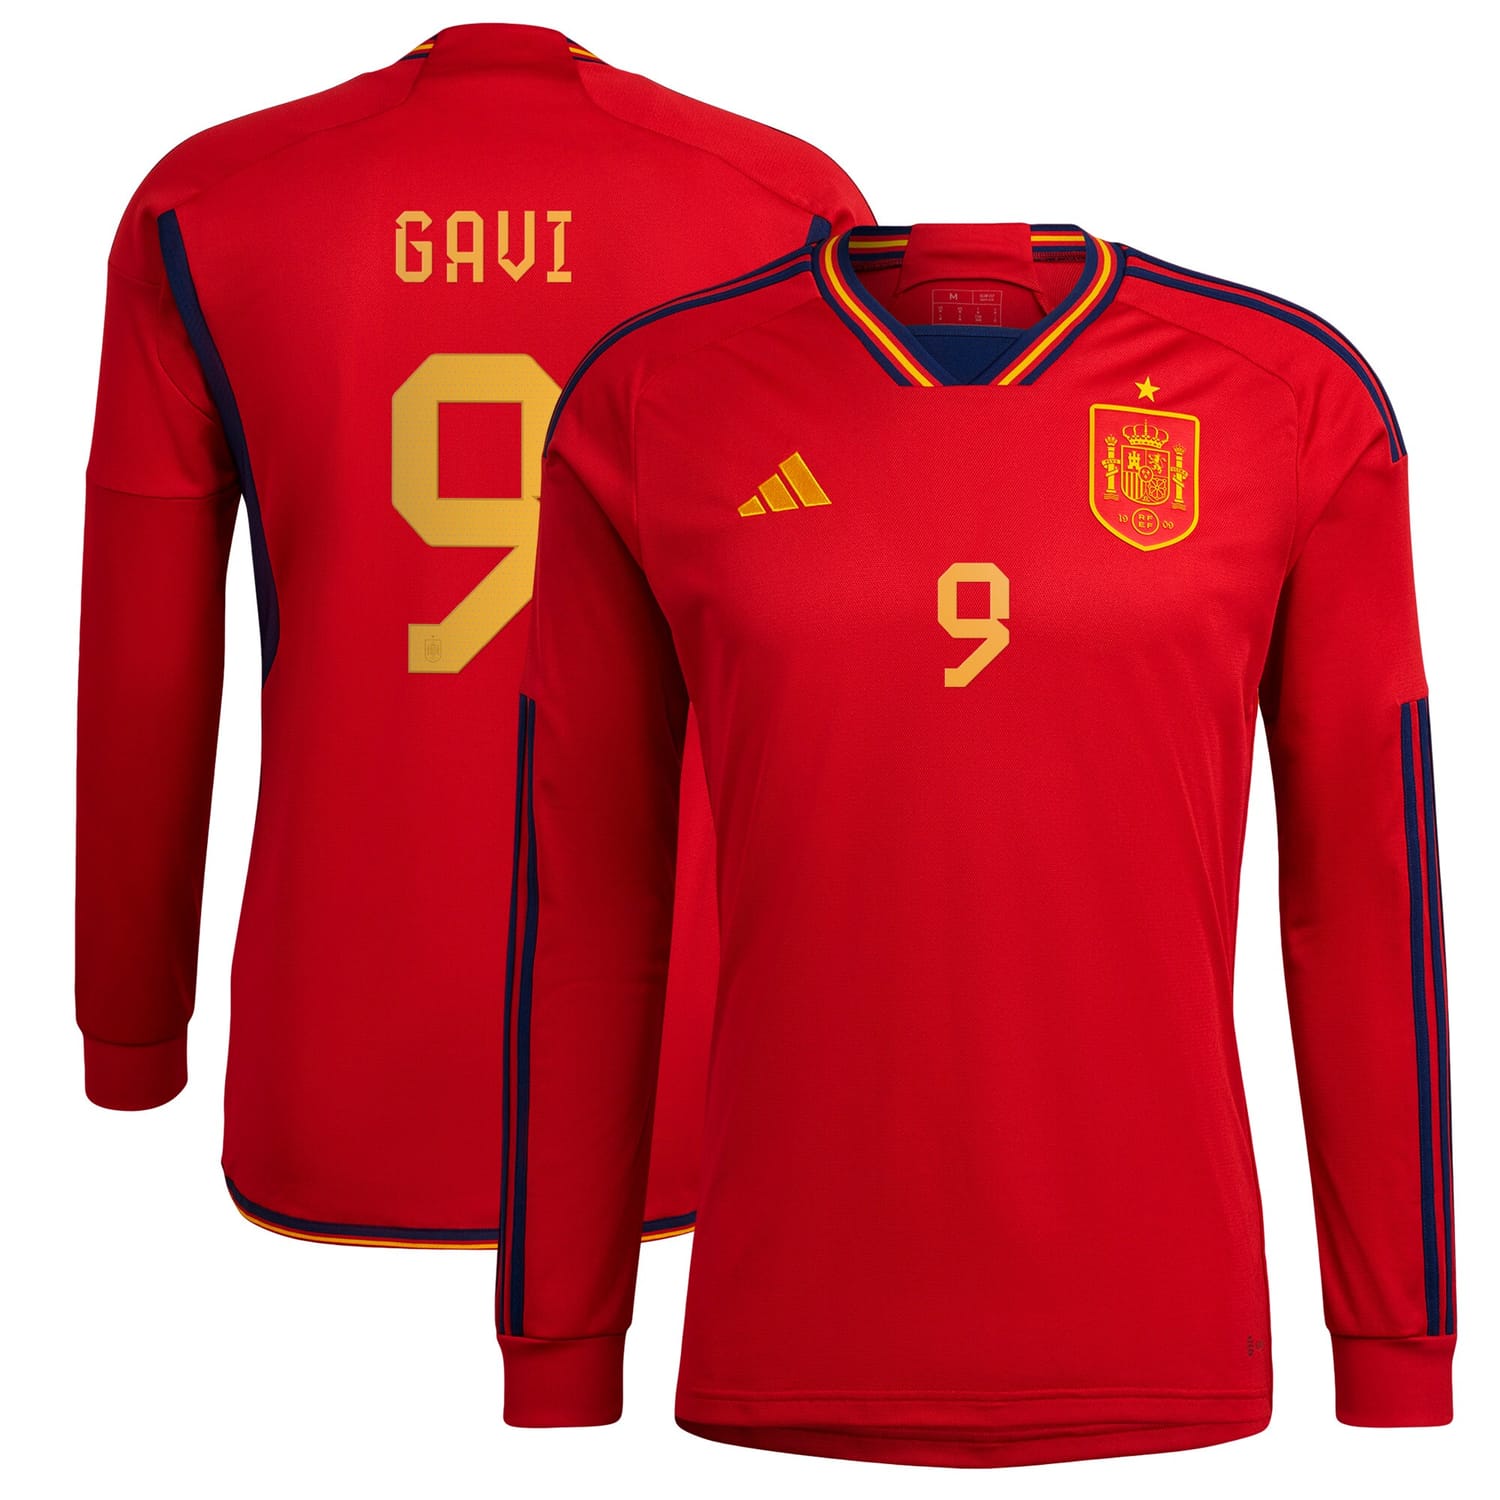 Spain National Team Home Jersey Shirt Long Sleeve Red 2022-23 player Gavi printing for Men